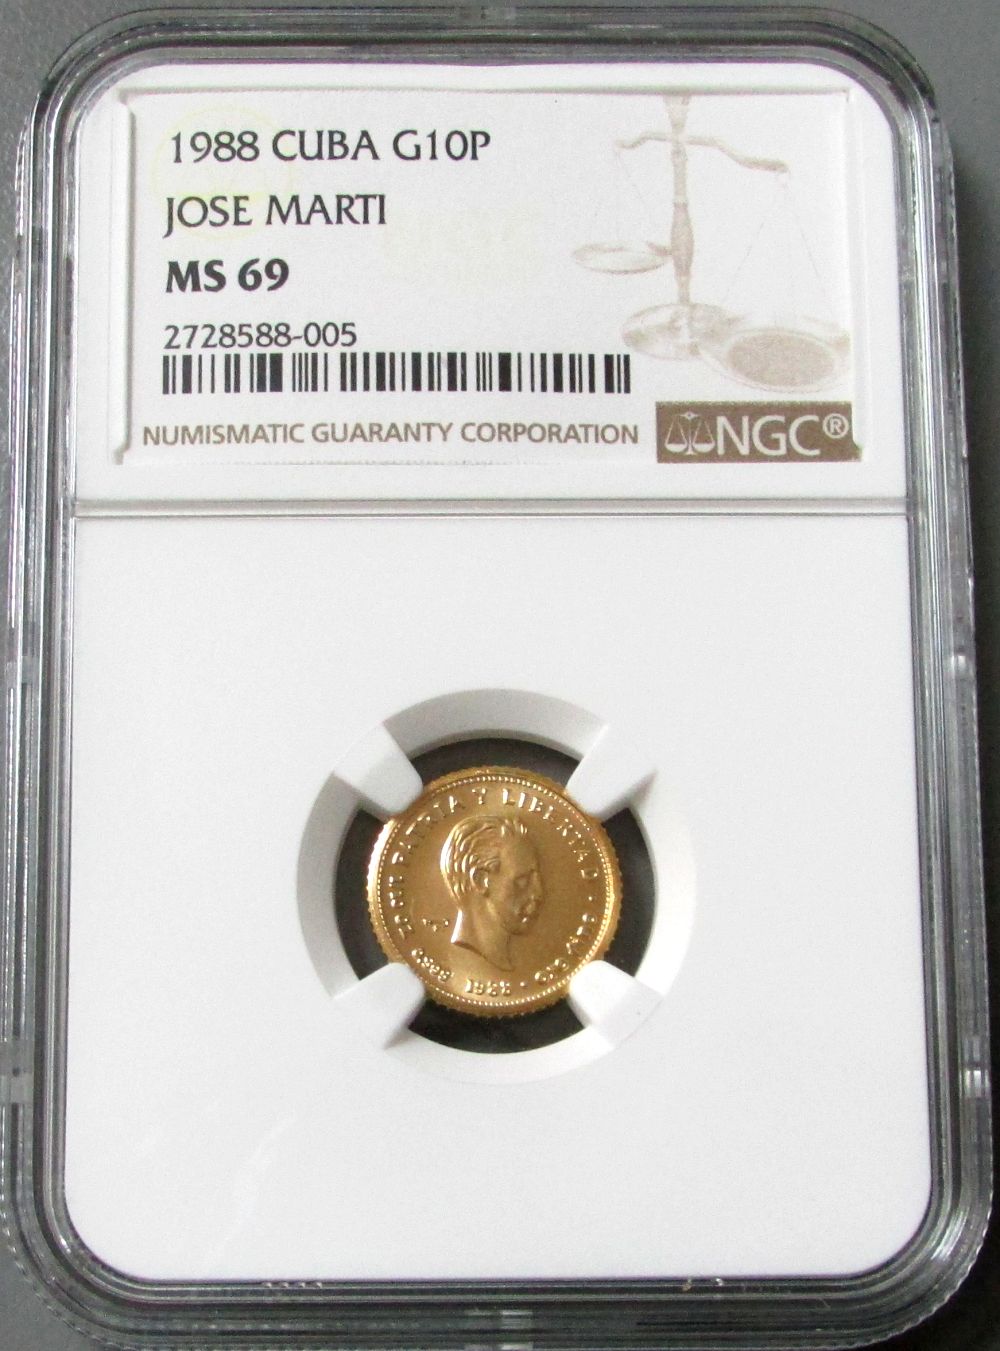 1988 GOLD CUBA 10 PESO JOSE MARTI NGC MINT STATE 69 ONLY 50 MINTED